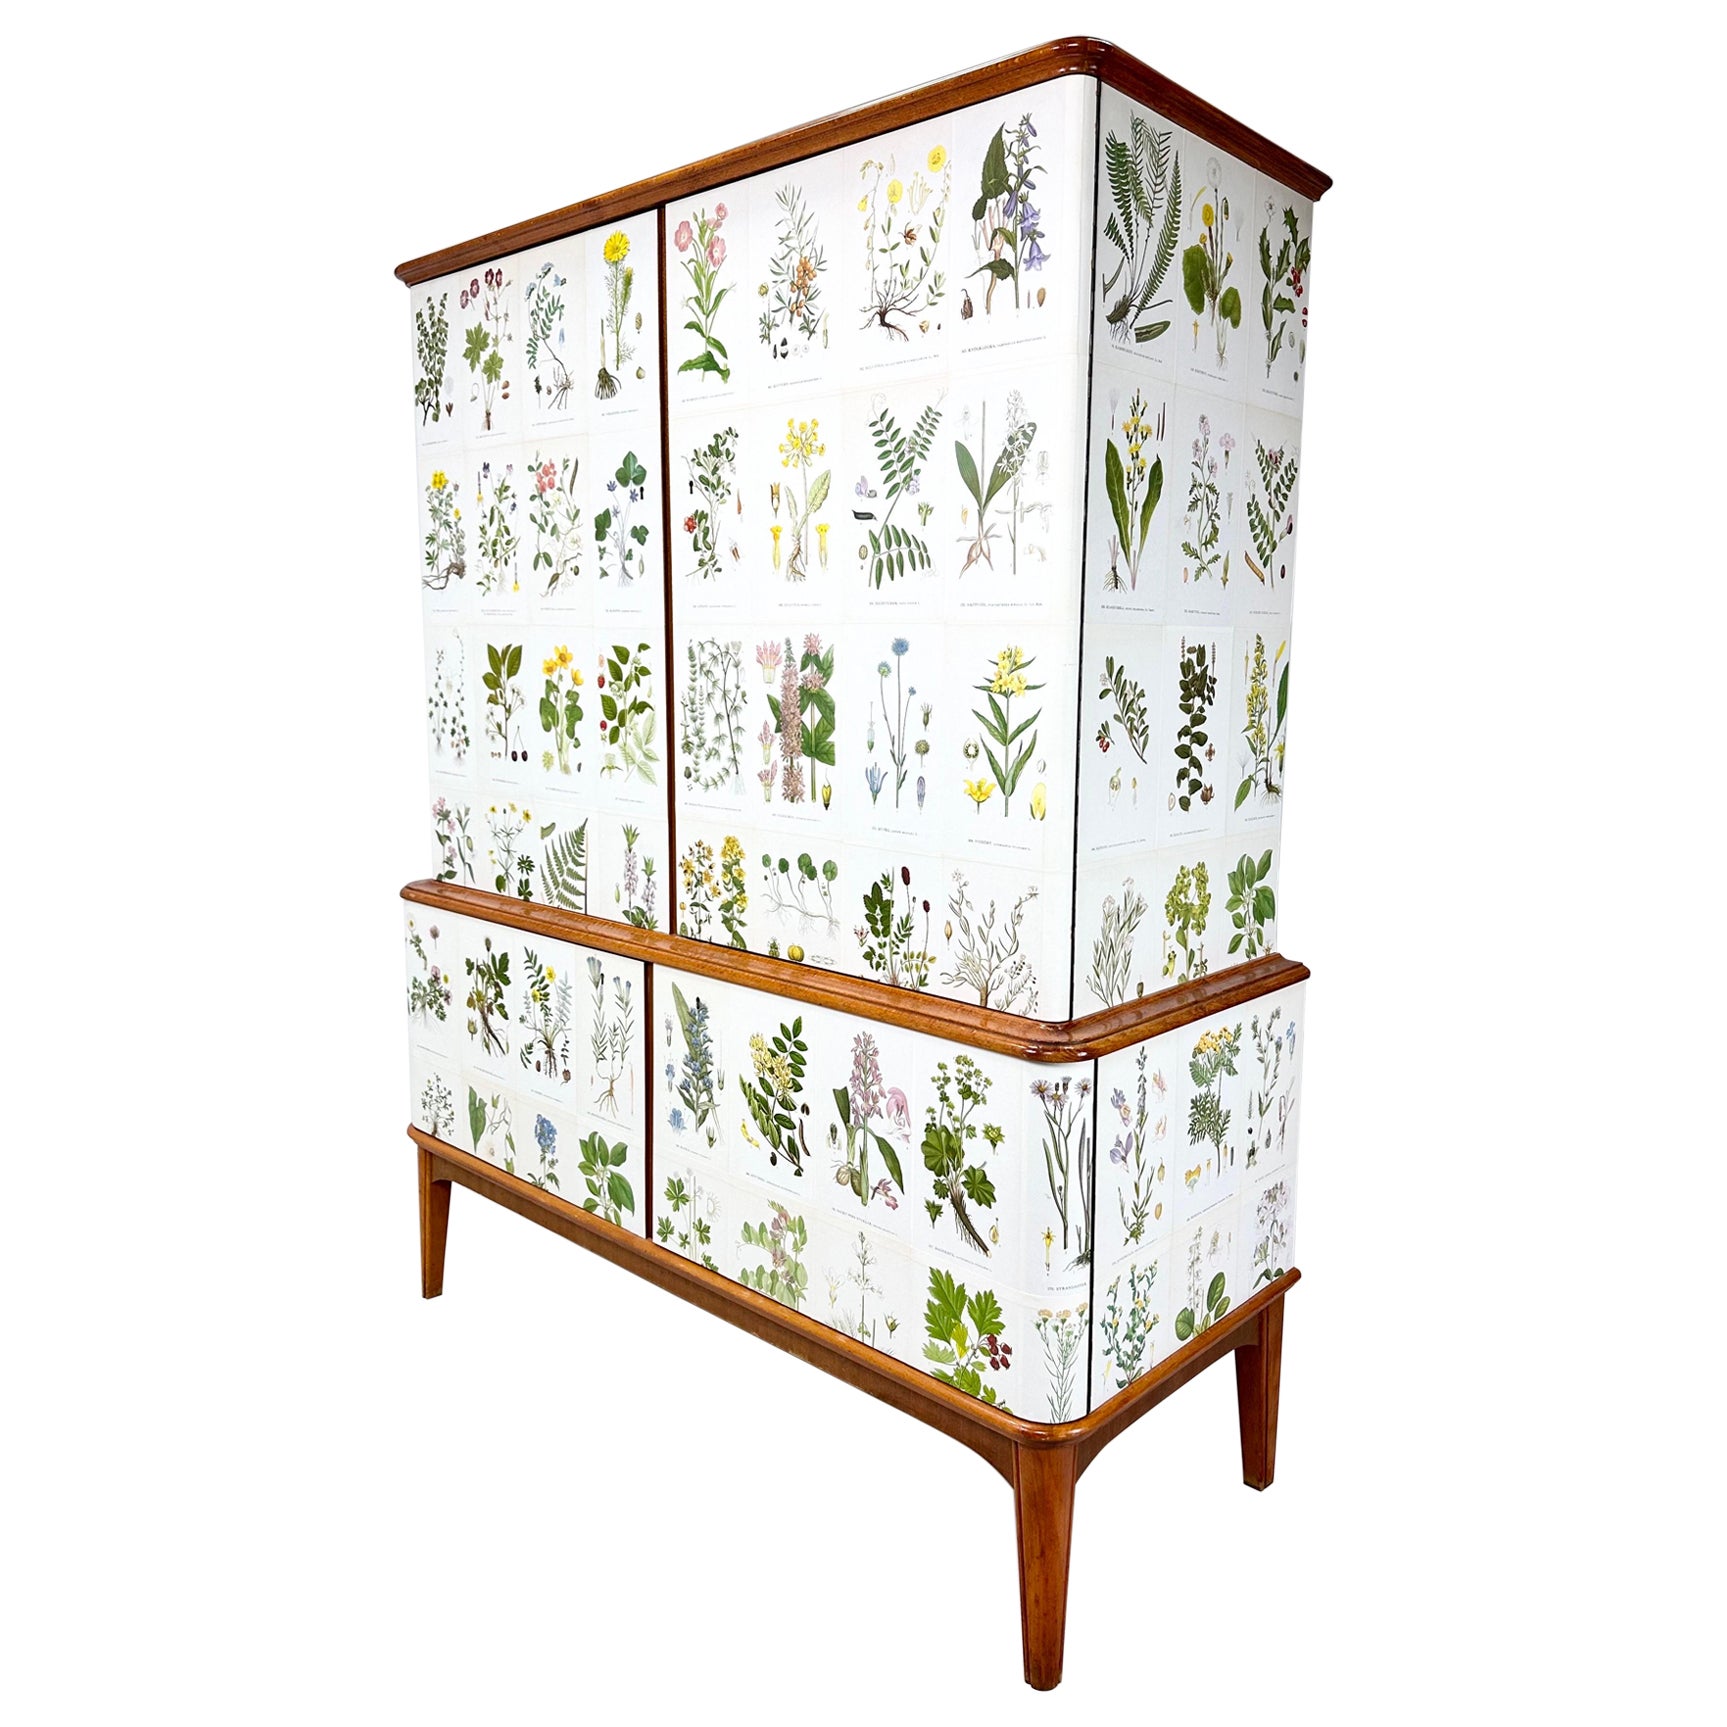 1950’s Swedish Cabinet With Nordens Flora Illustrations